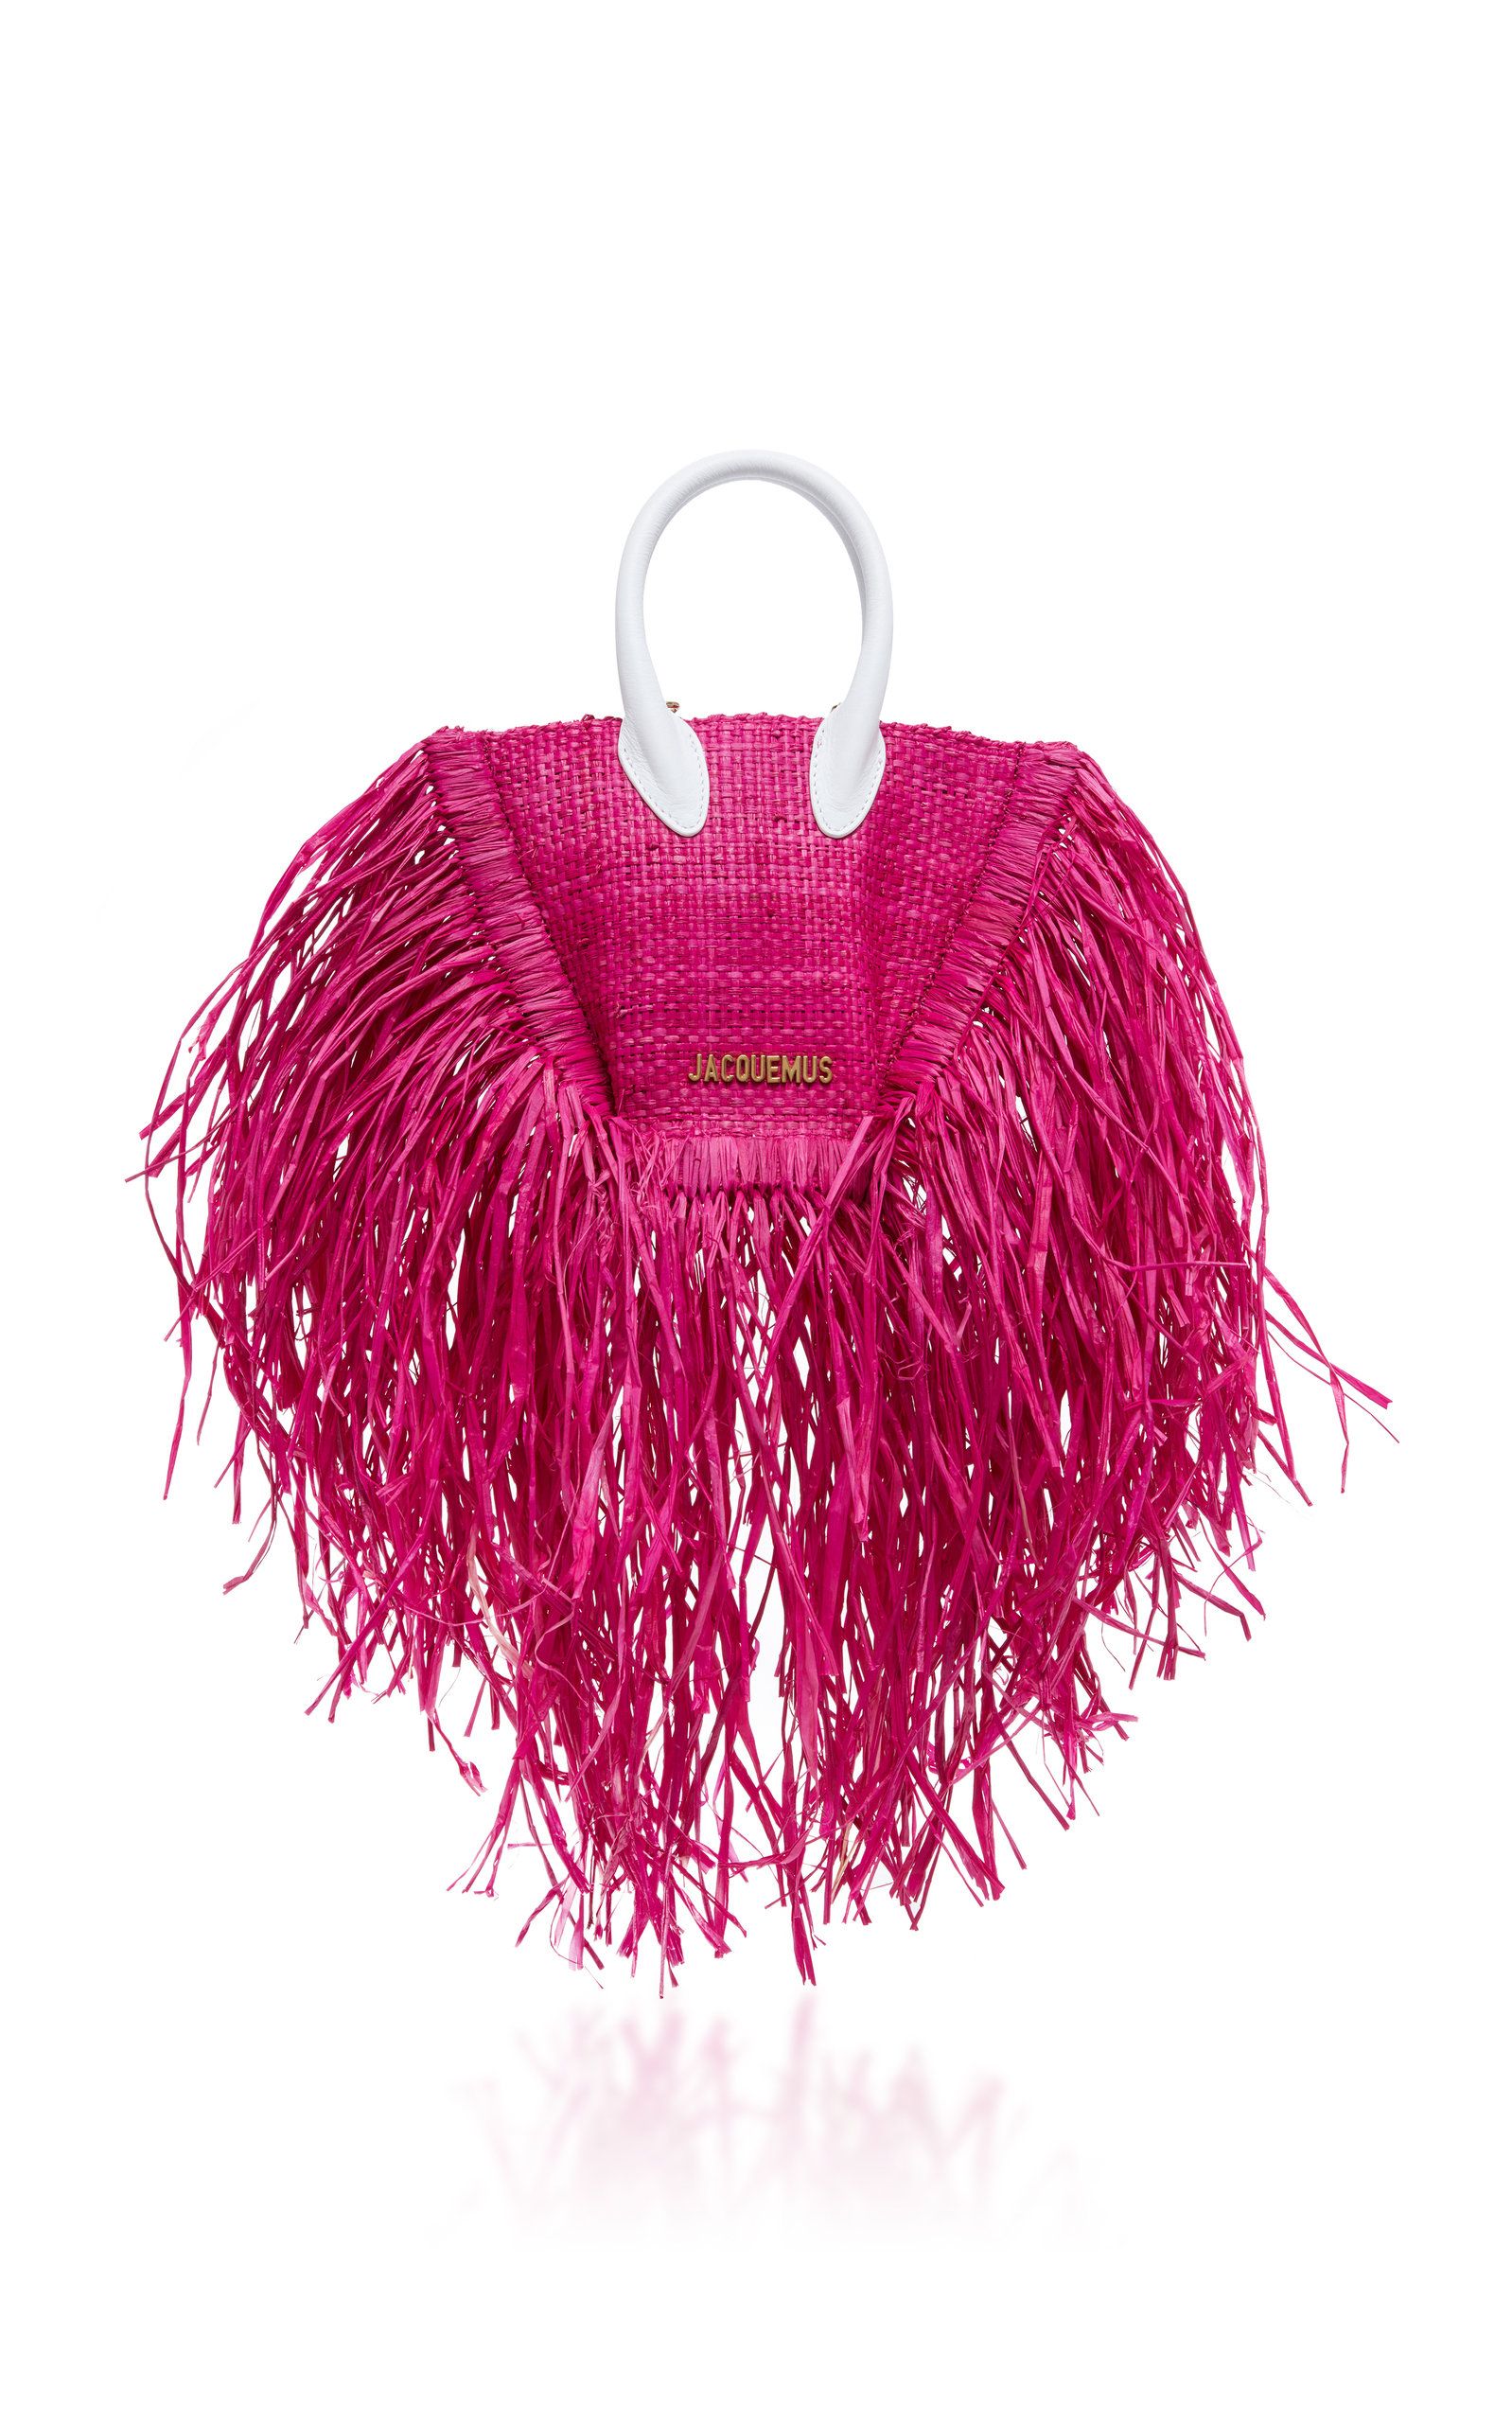 https://hips.hearstapps.com/vader-prod.s3.amazonaws.com/1590599740-large_jacquemus-pink-le-petit-baci-fringed-straw-bag.jpg?crop=1xw:1xh;center,top